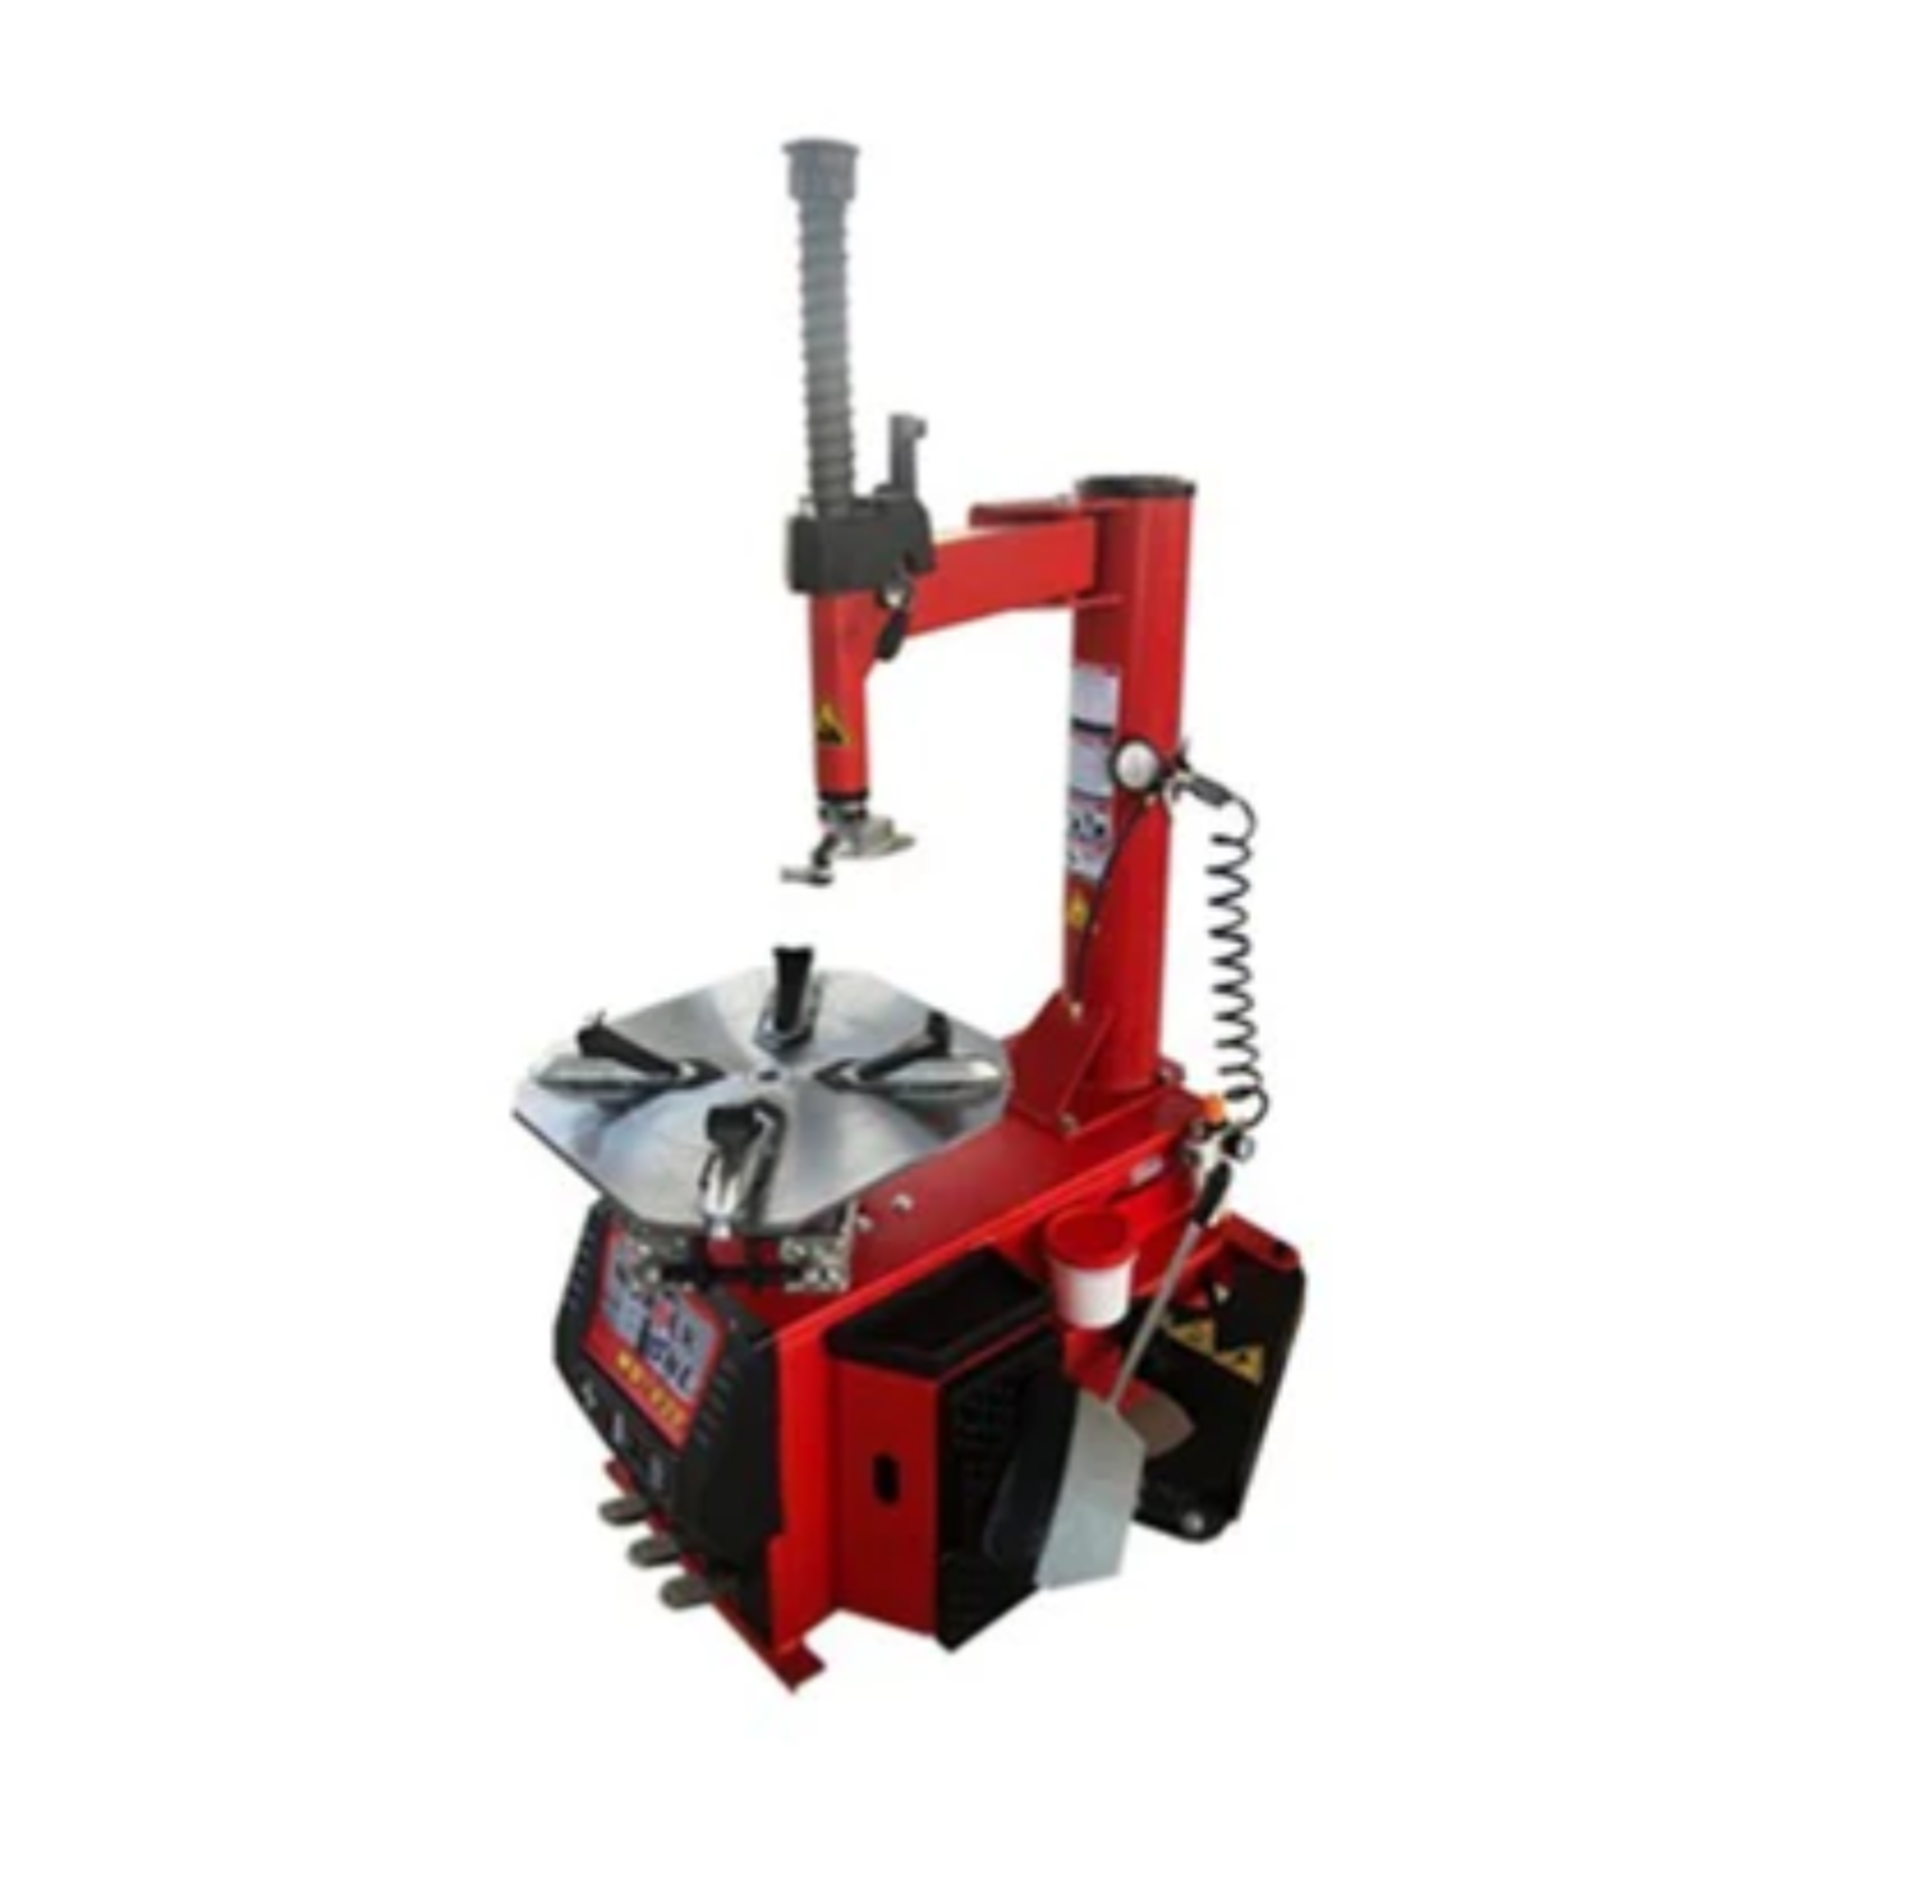 Bastone Tire changer: 110V, 60hz Heavy Duty Automotive Tire Changer - Outside Clamping 10”-22” - Ins - Image 4 of 4